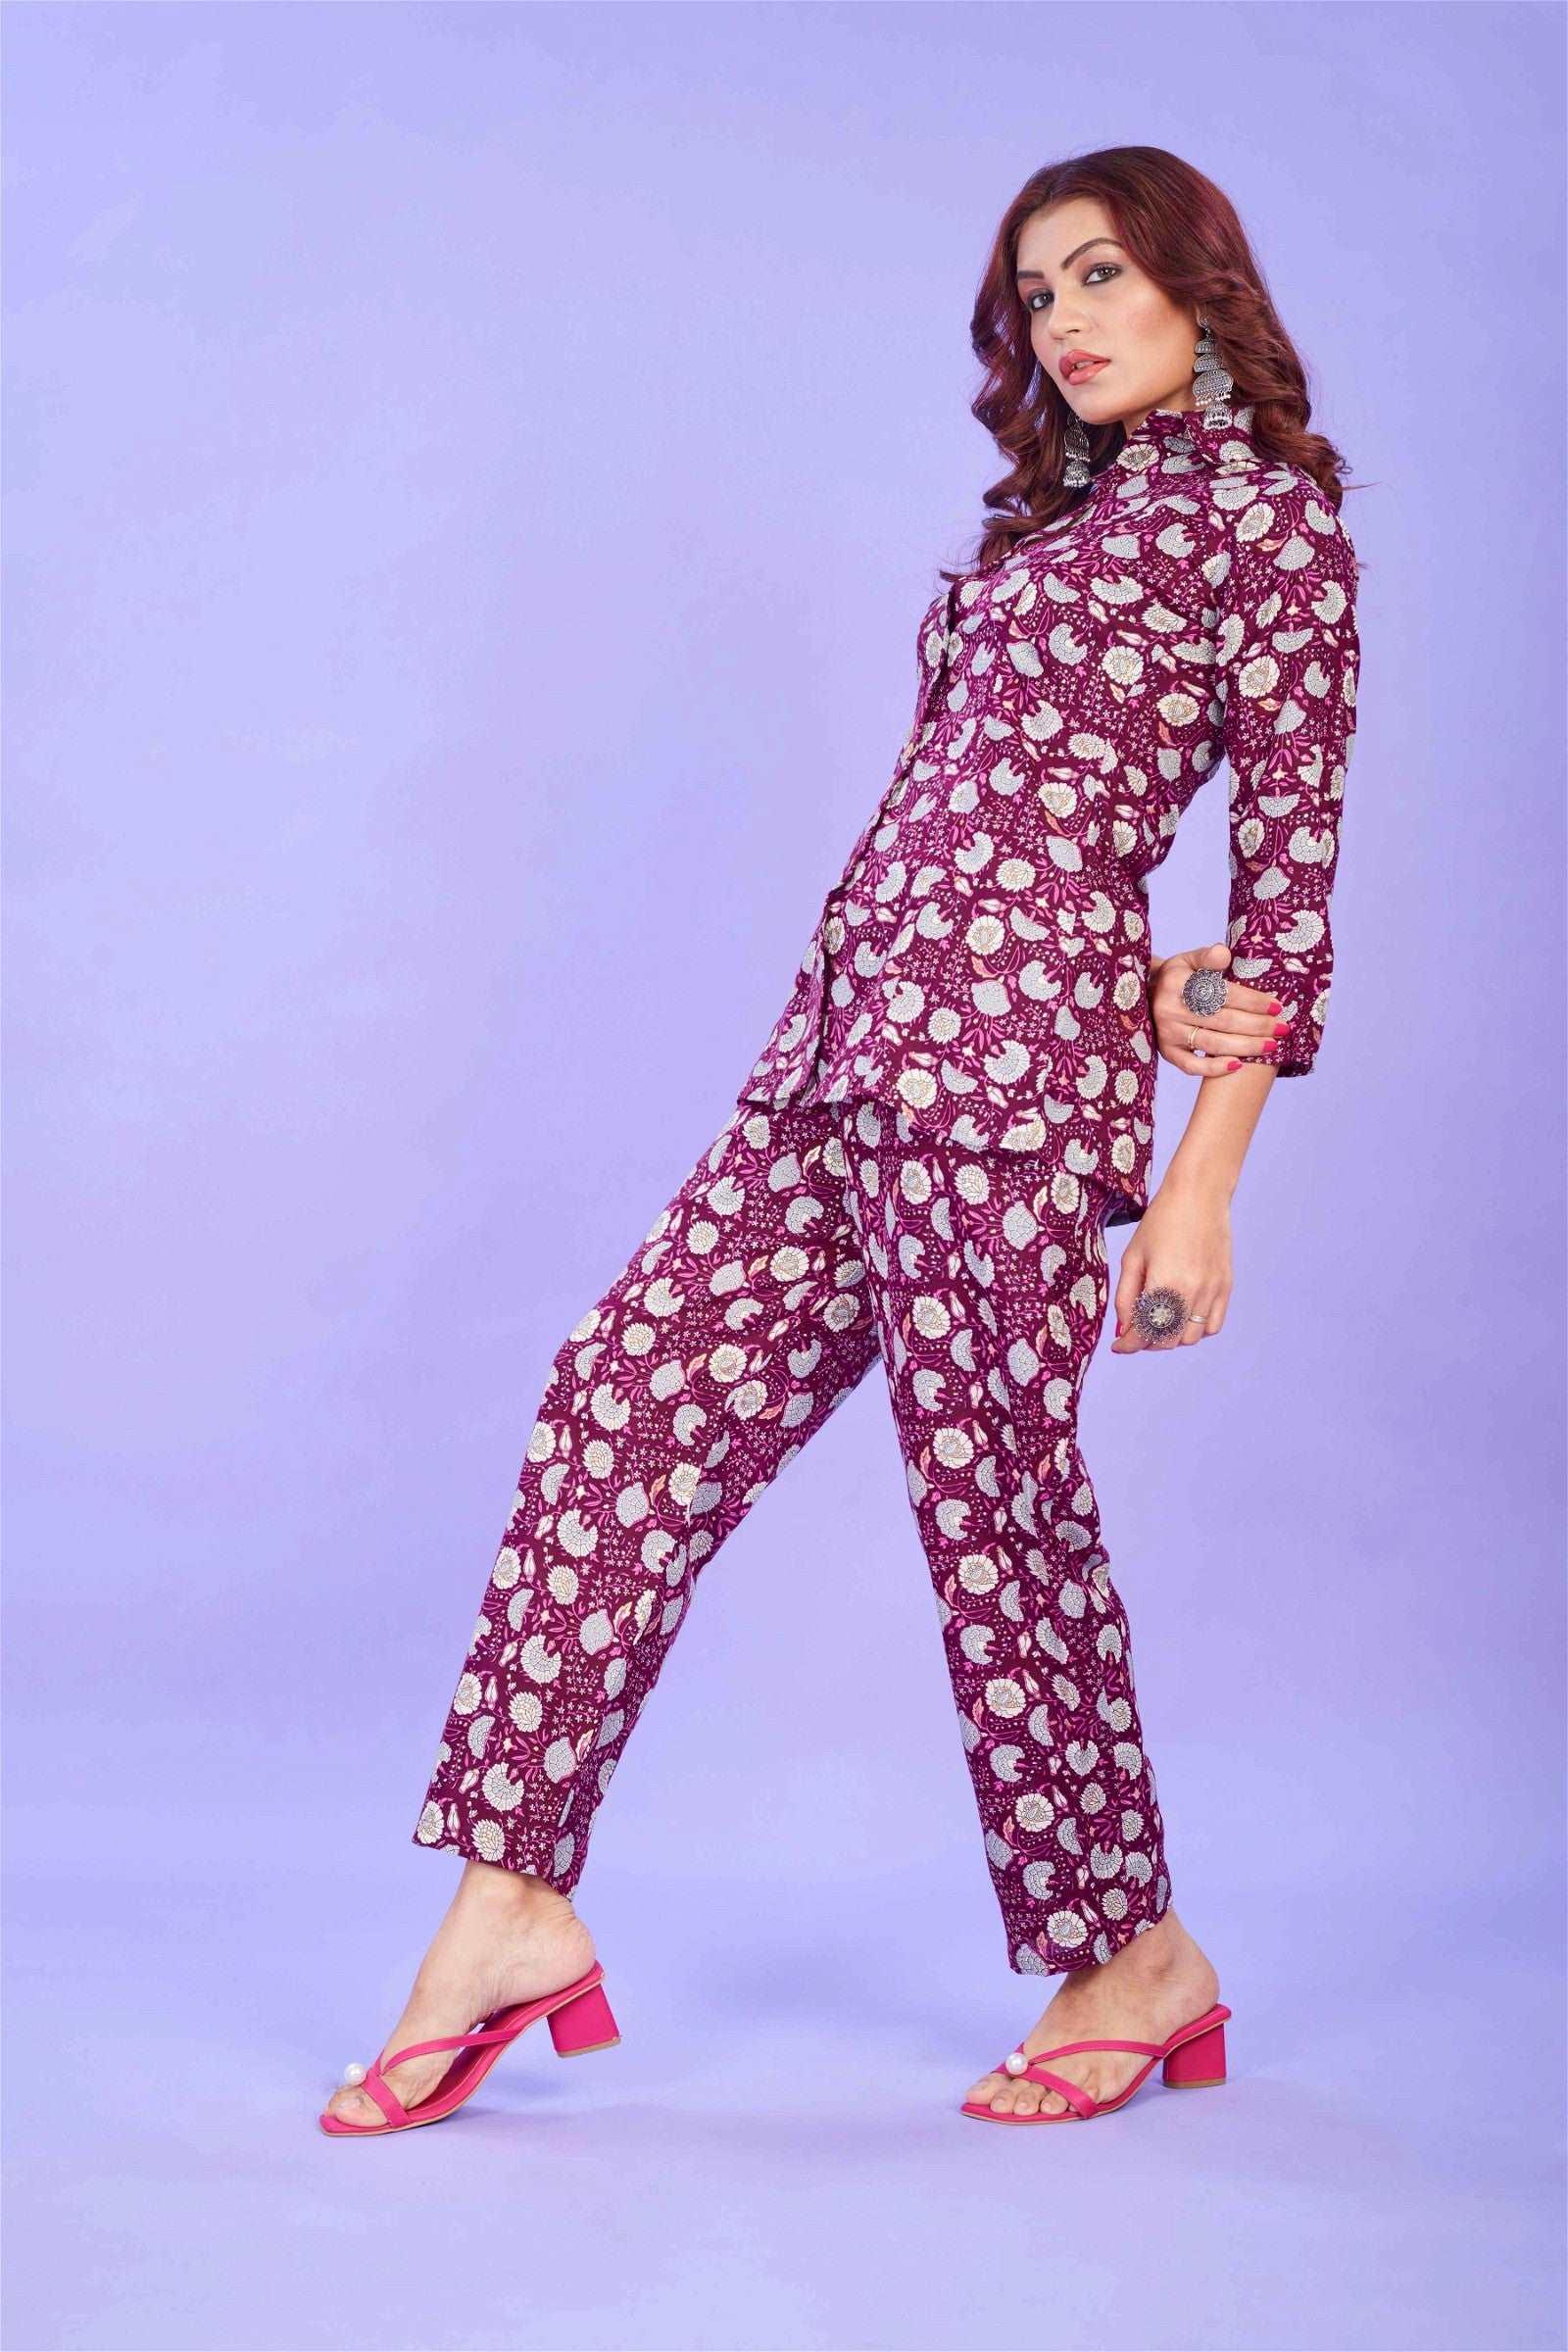 The model in the image is wearing Cotton Printed Party Red Co ord Set from Alice Milan. Crafted with the finest materials and impeccable attention to detail, the  looks premium, trendy, luxurious and offers unparalleled comfort. It’s a perfect clothing option for loungewear, resort wear, party wear or for an airport look. The woman in the image looks happy, and confident with her style statement putting a happy smile on her face.